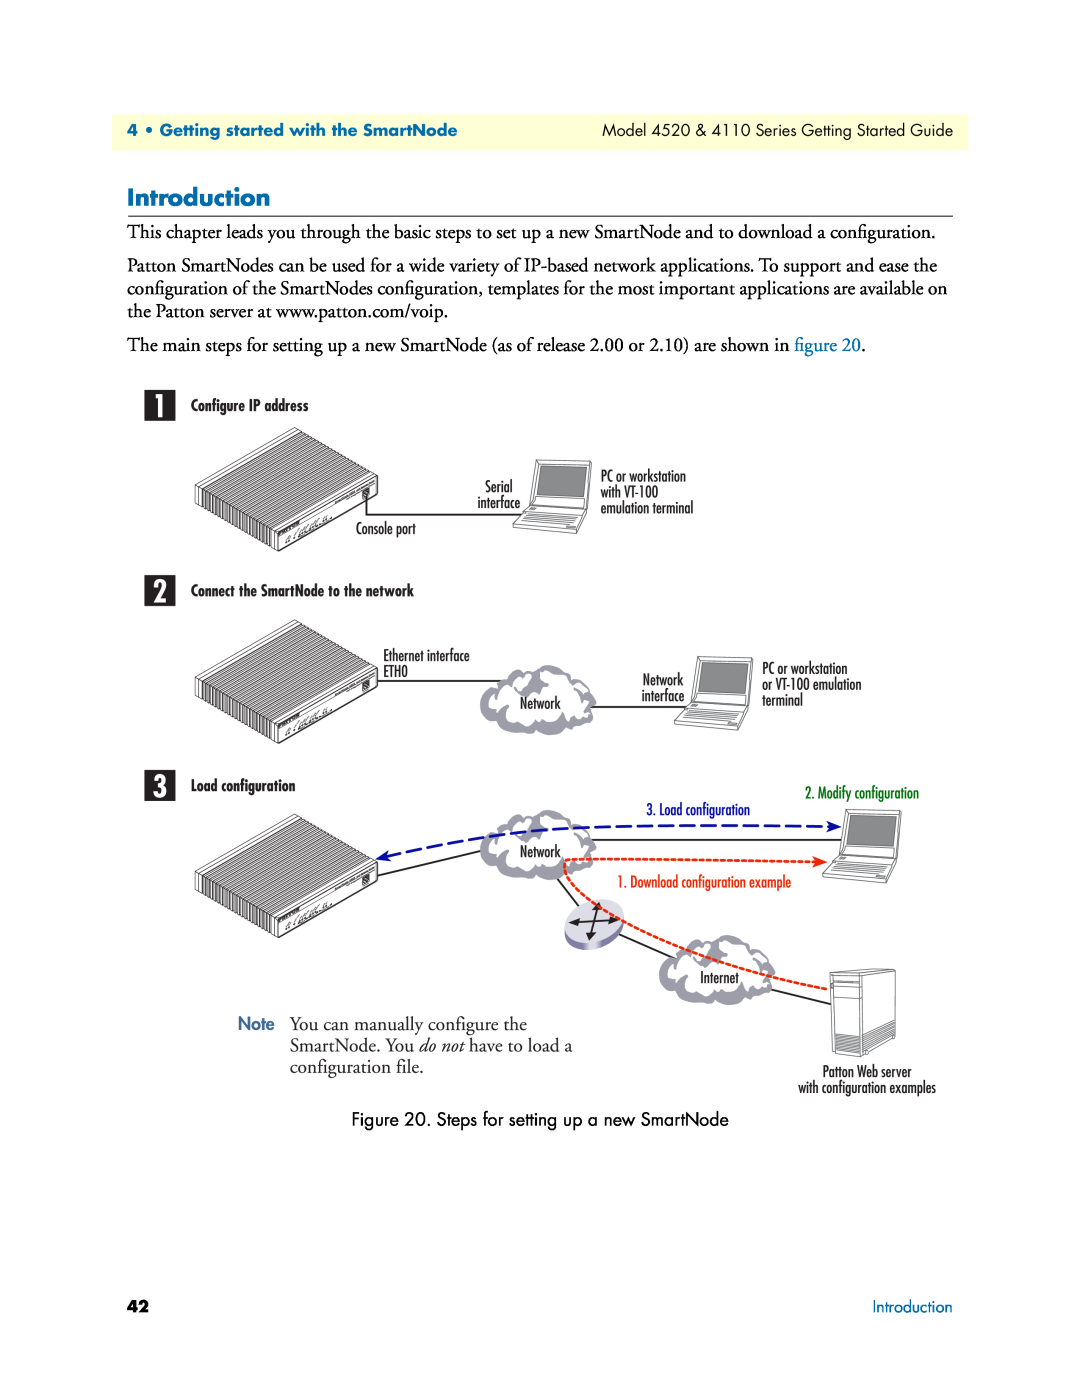 Patton electronic 4110 manual Introduction, Steps for setting up a new SmartNode 